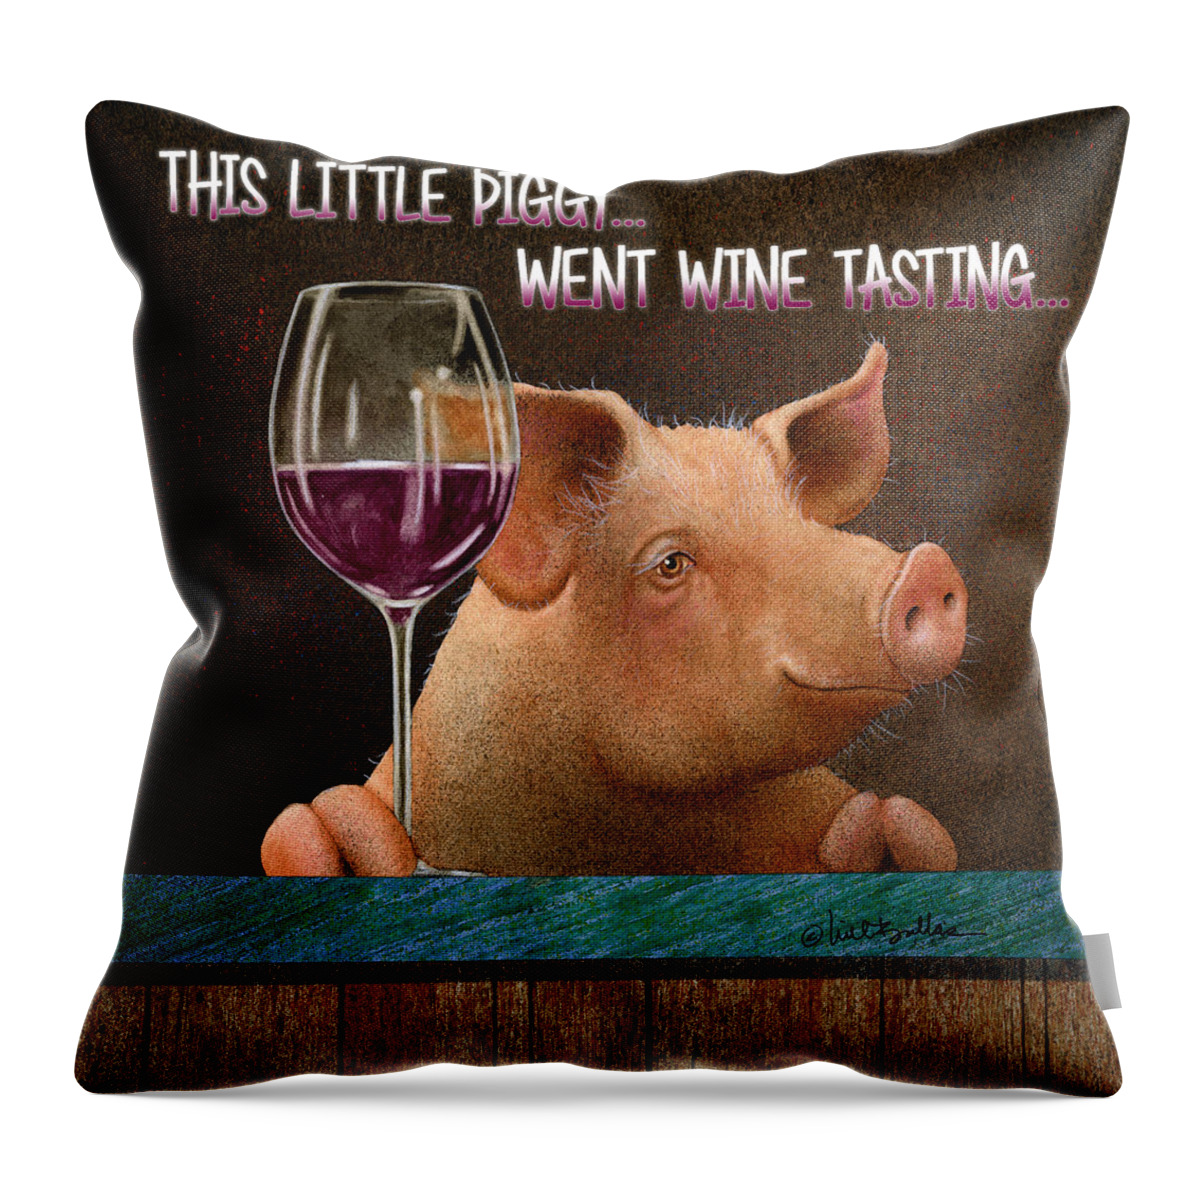 Will Bullas Throw Pillow featuring the painting This Little Piggy Went Wine Tasting... #2 by Will Bullas